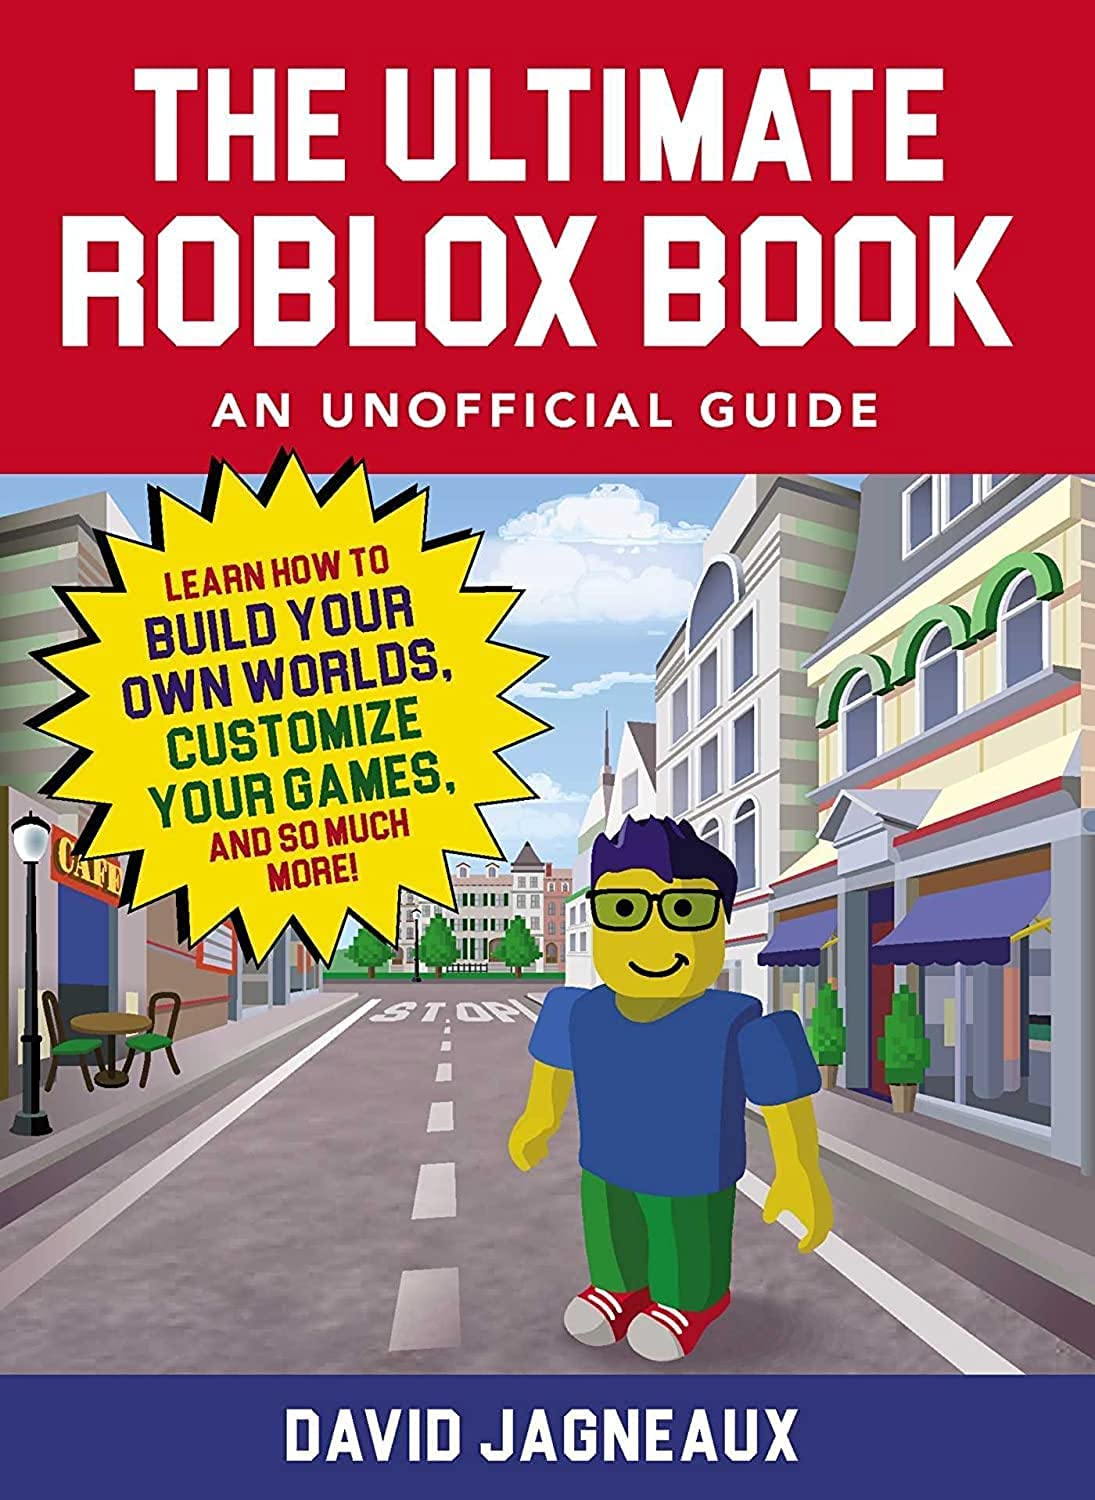 The Ultimate Roblox Book: An Unofficial Guide: Learn How to Build Your Own Worlds, Customize Your Games, and So Much More! (Unof